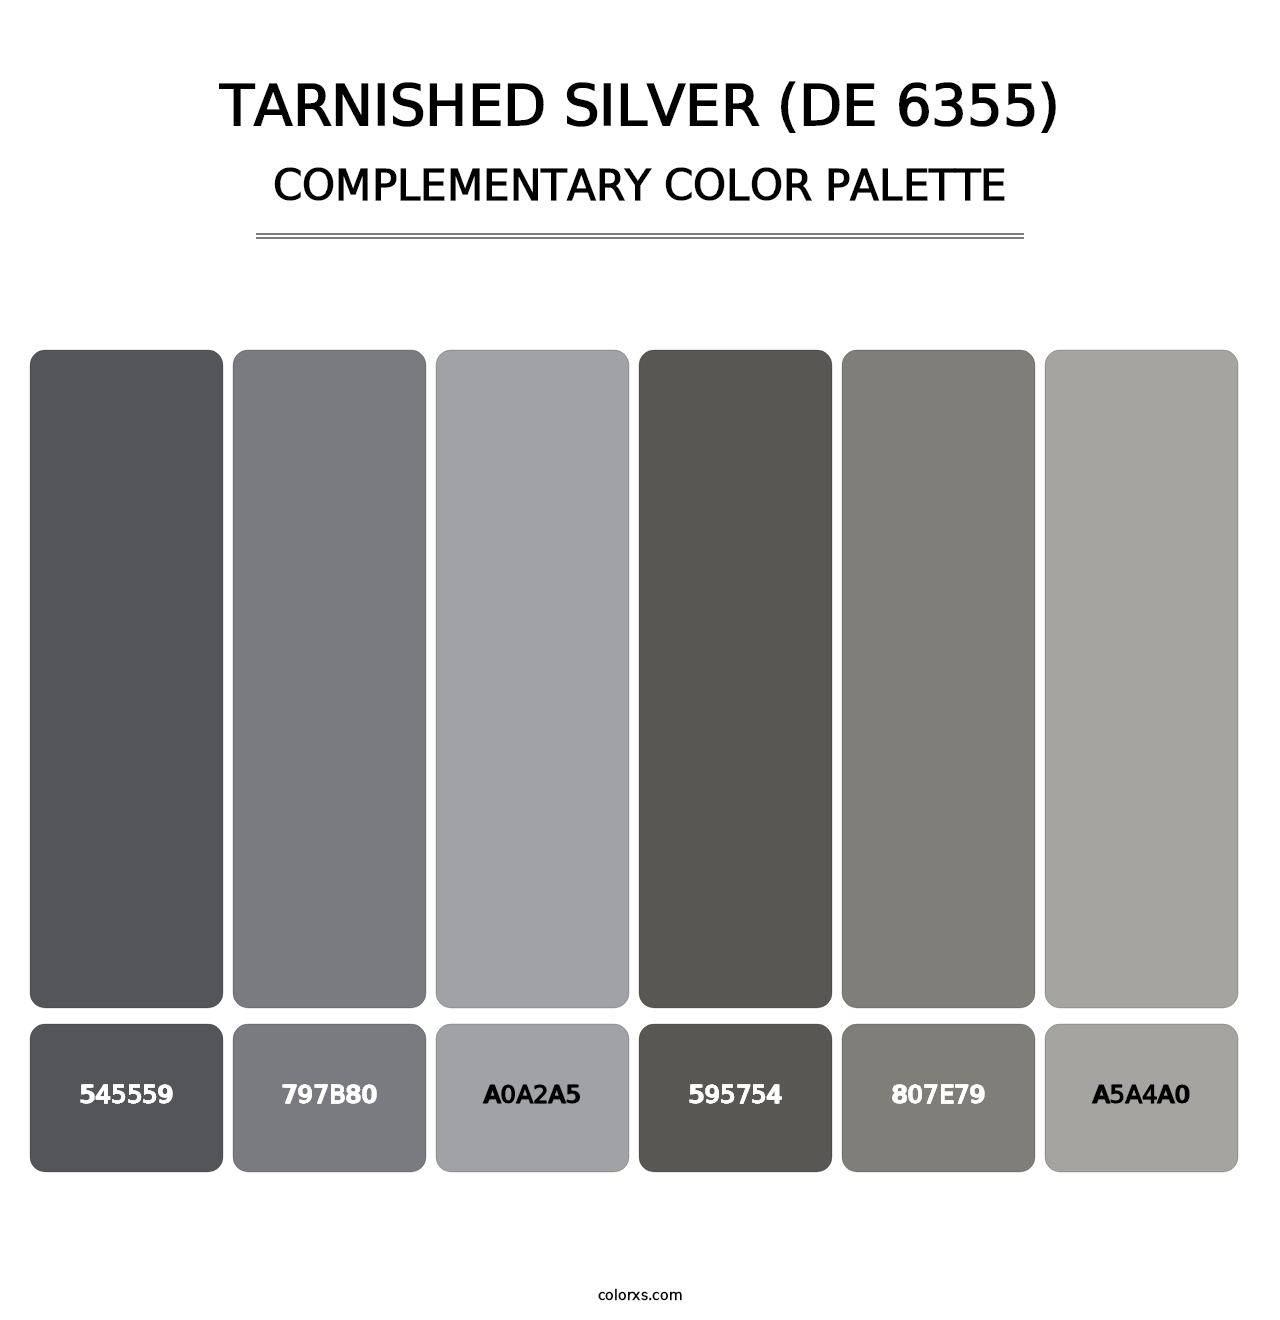 Tarnished Silver (DE 6355) - Complementary Color Palette